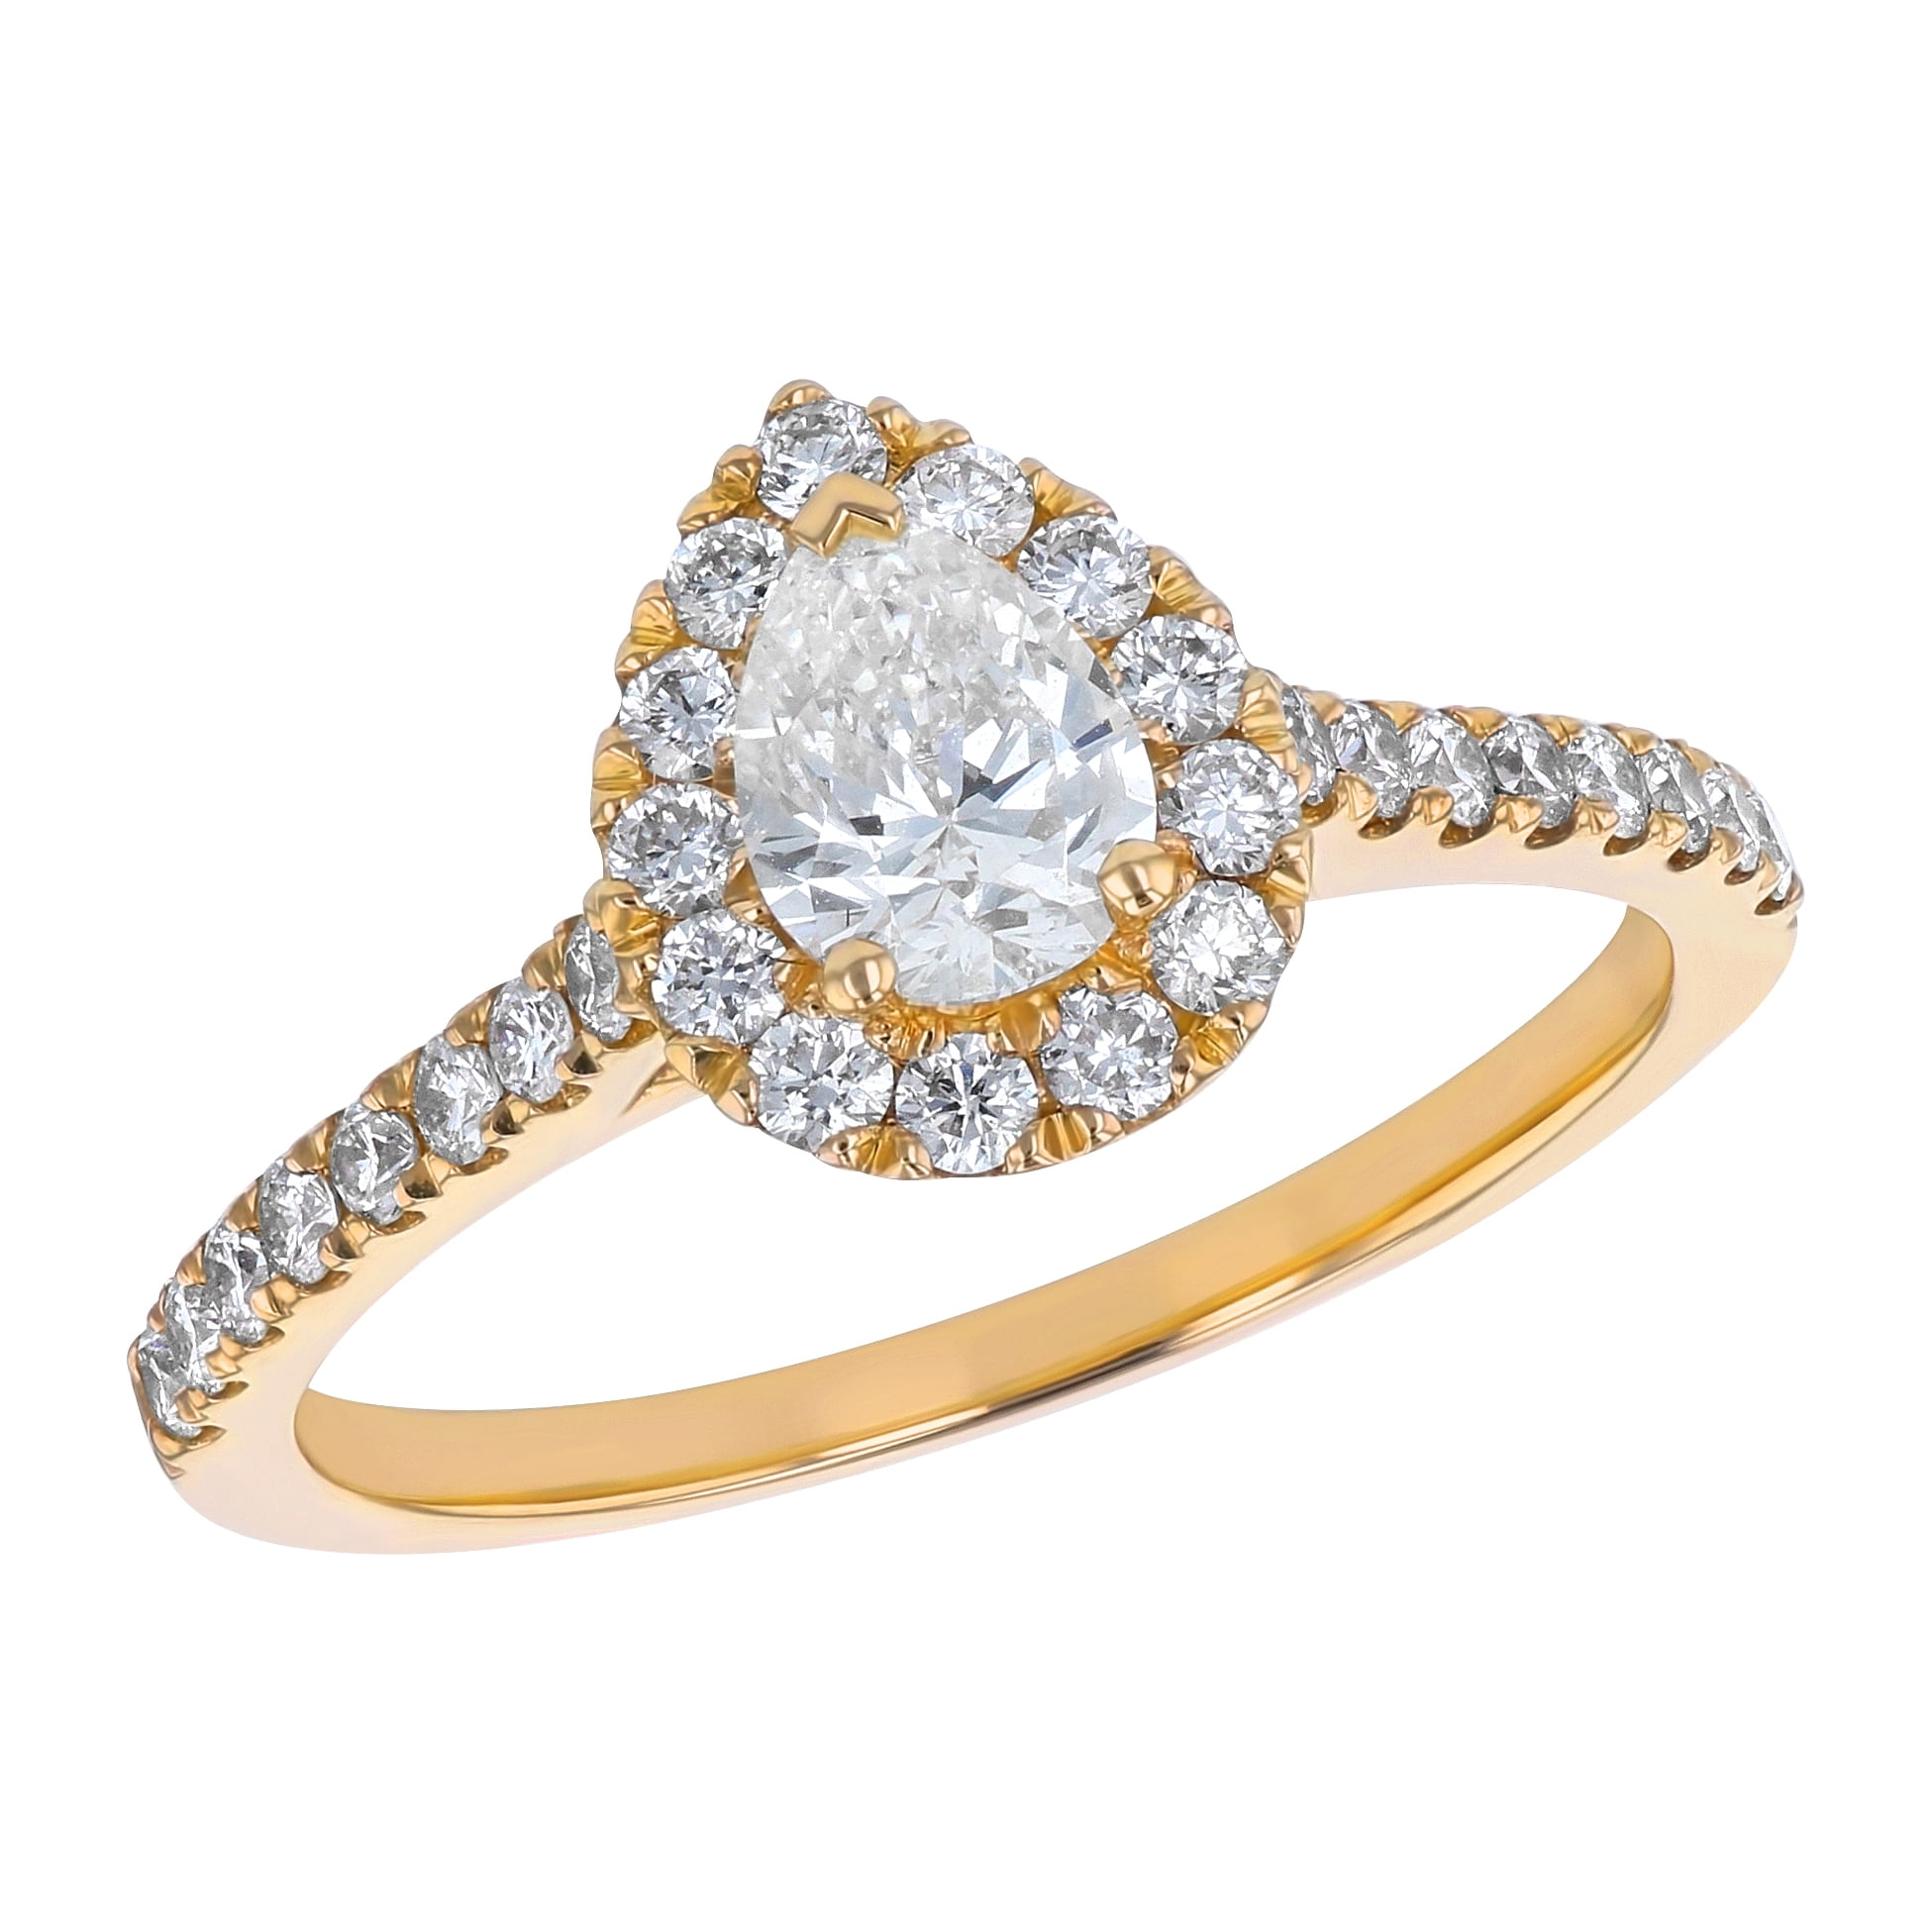 Hollywood Hills Jewelers - 14K Yellow Gold 1 cttw. Certified Diamonds ...